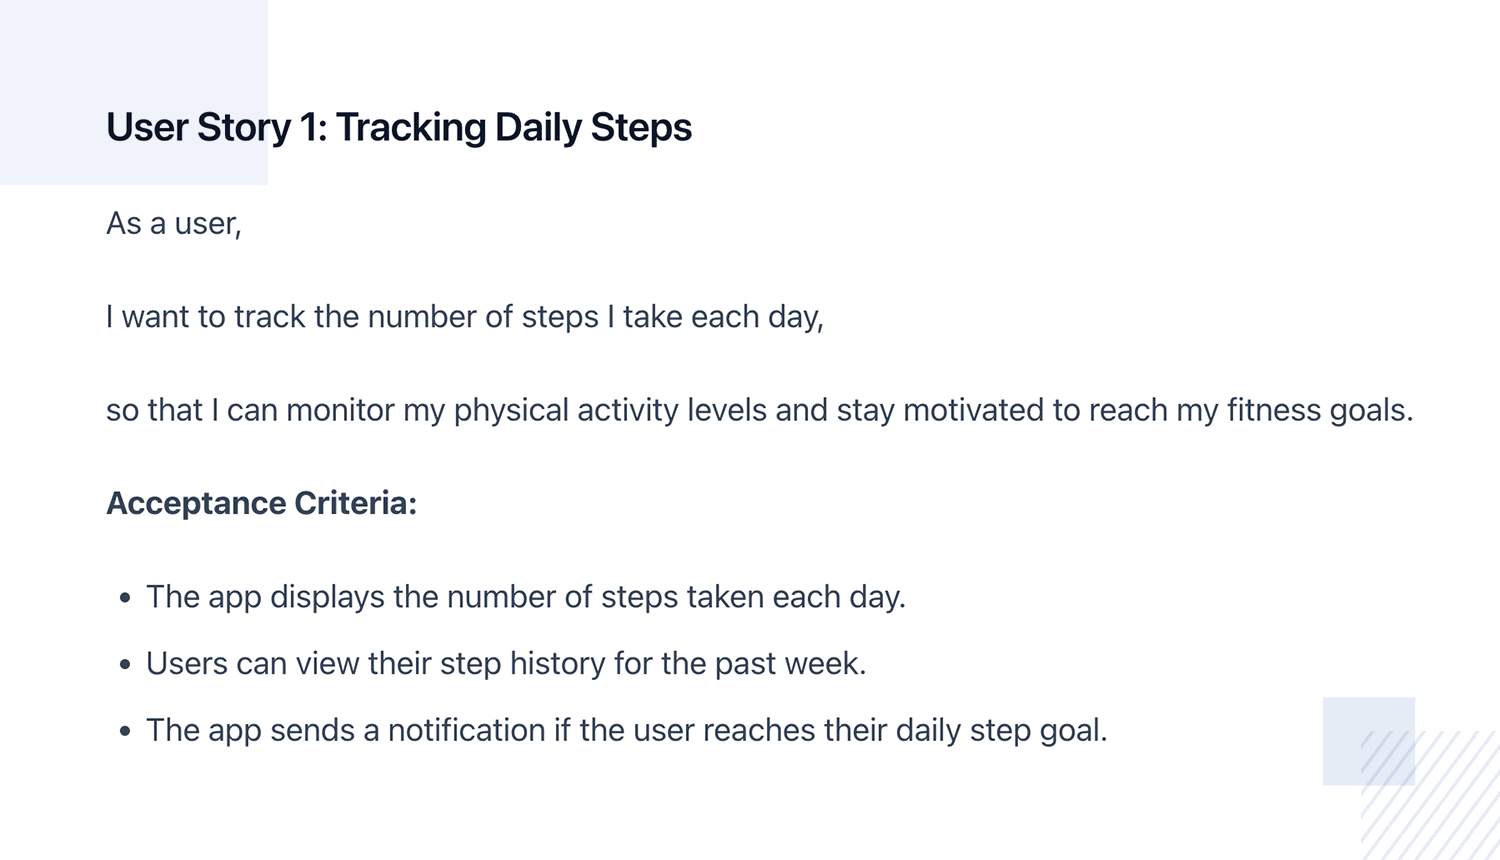 User story for tracking daily steps with acceptance criteria